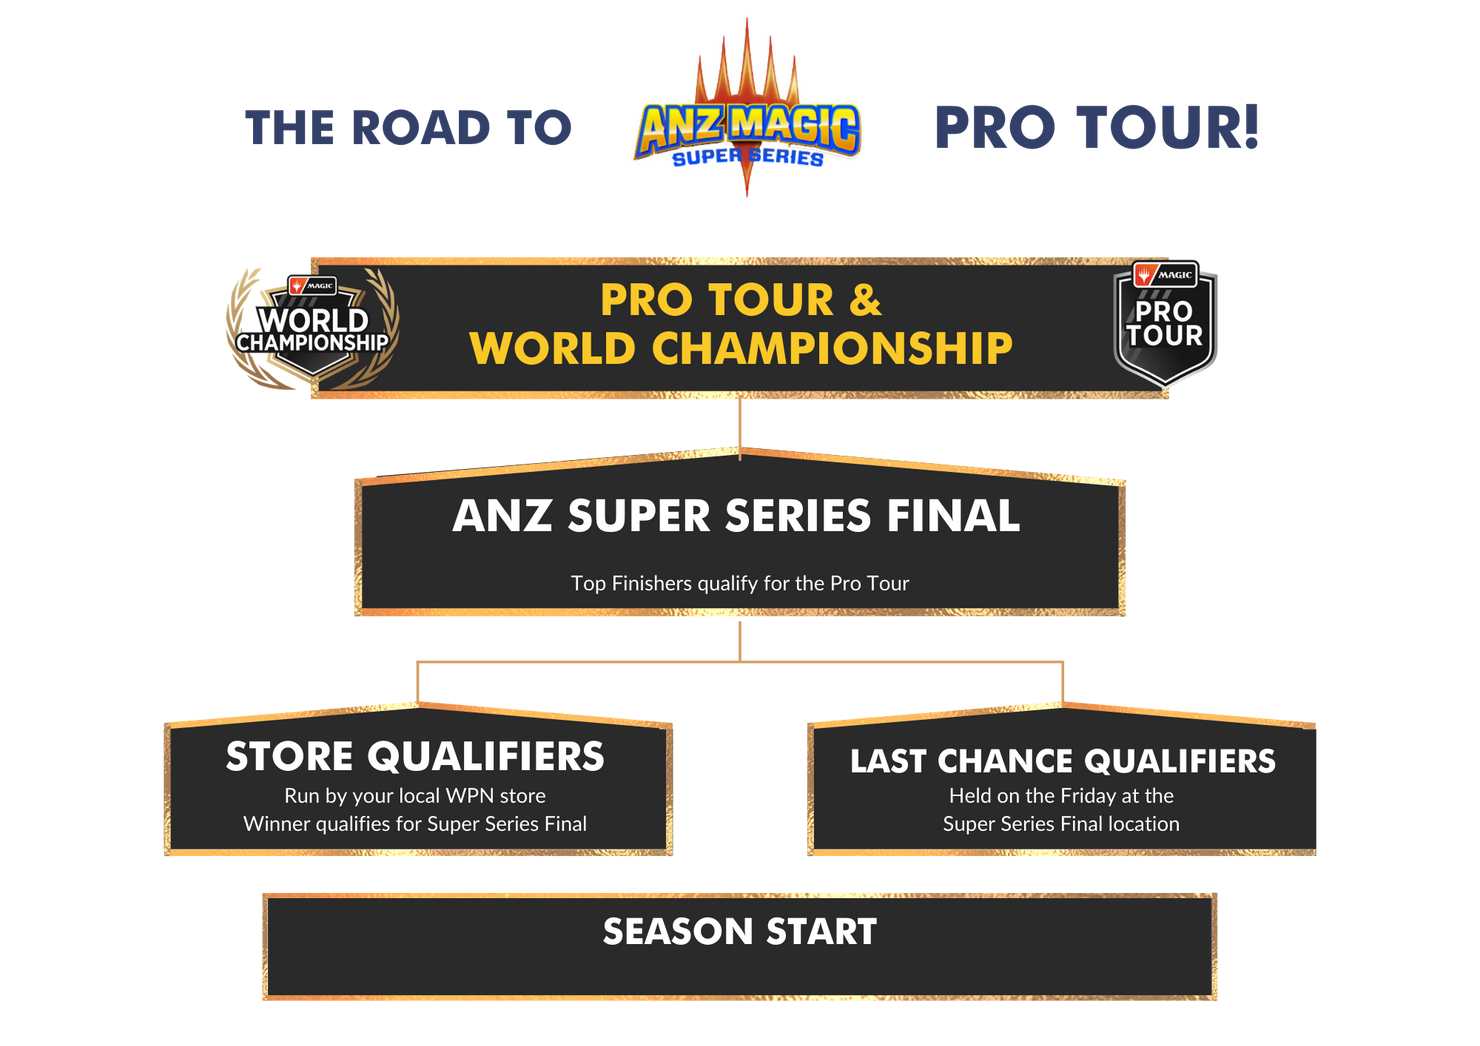 Road to the ANZ Magic pro tour